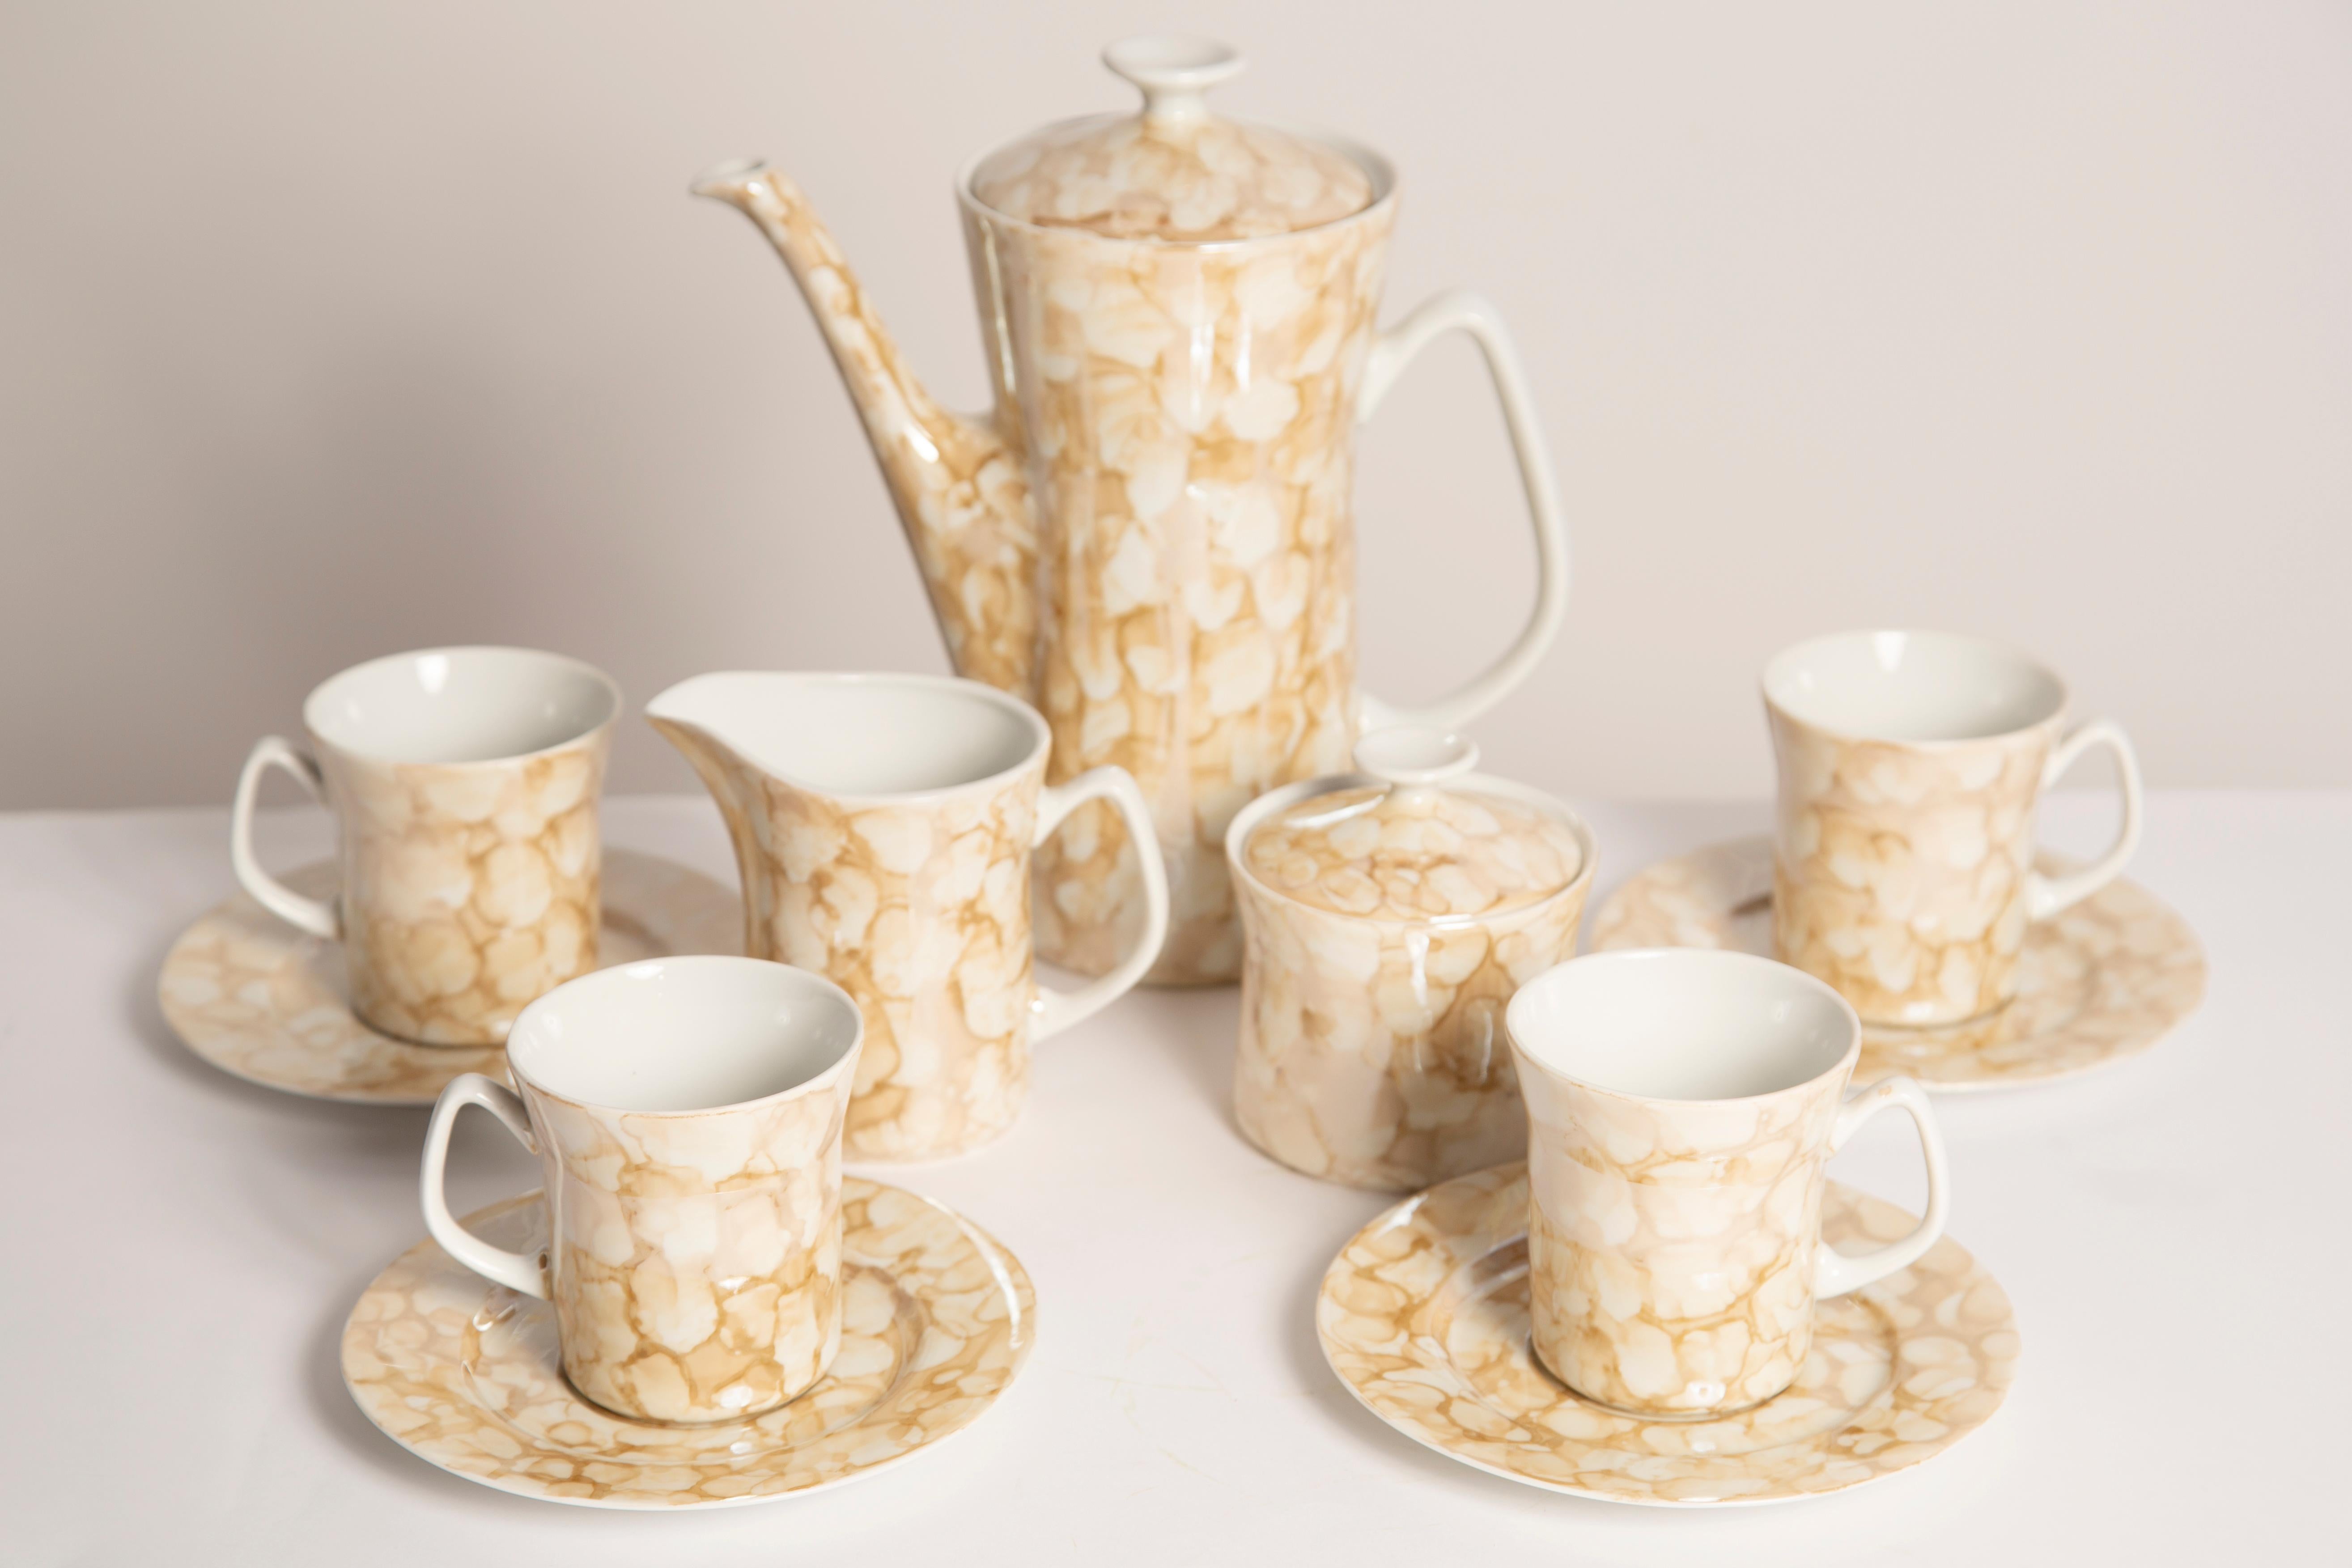 Polish Midcentury Porcelain Beige Marble Tea Coffee Service Jug and Cups, Poland, 1960 For Sale